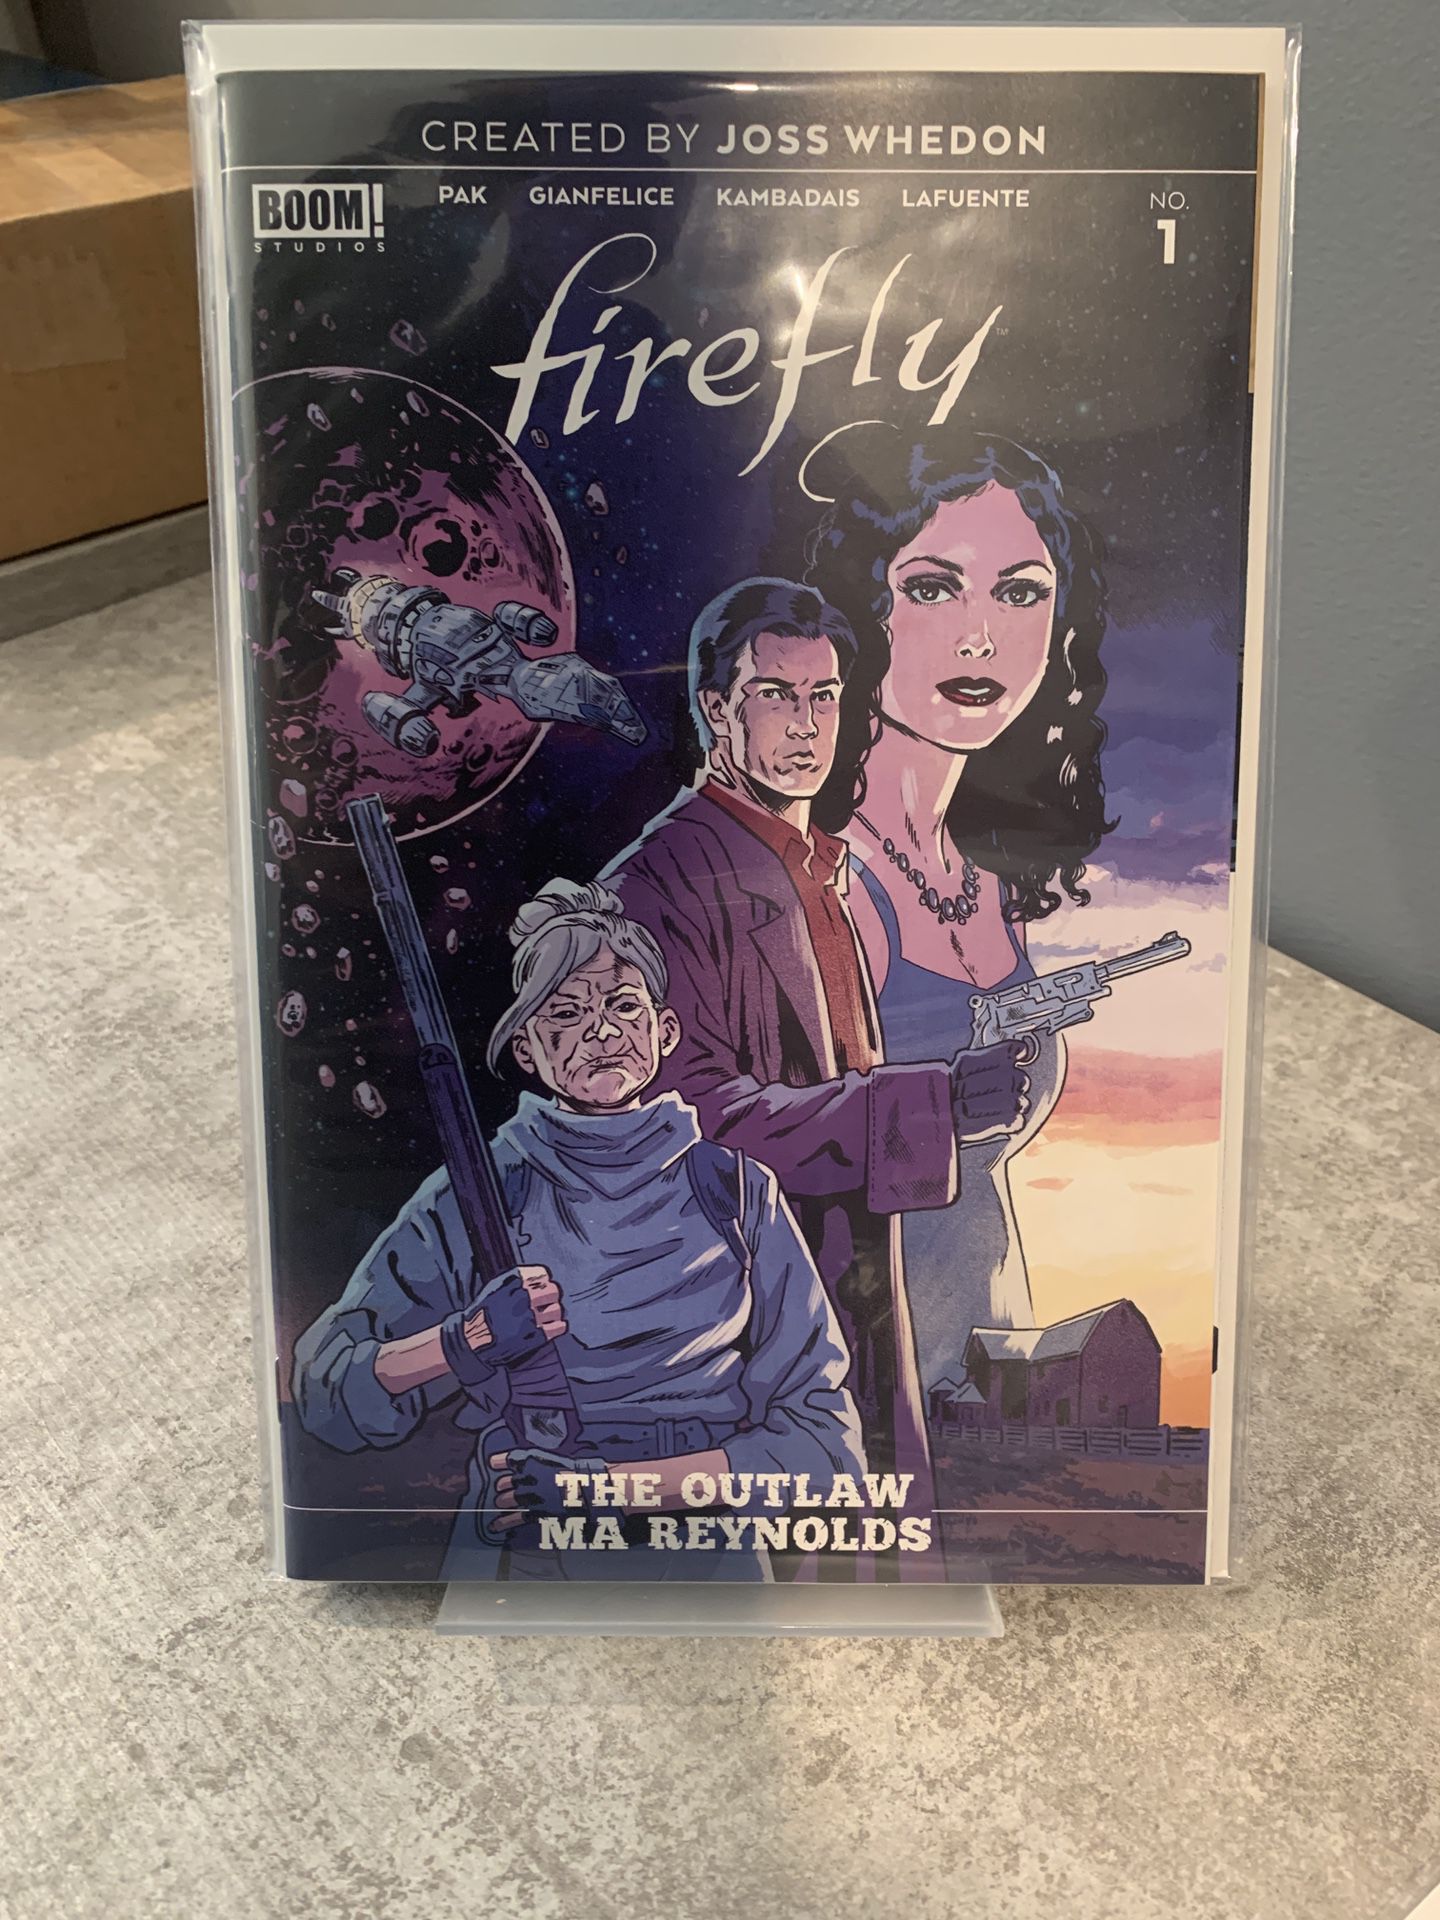 Firefly: The Outlaw Ma Reynolds #1 (Boom! Studios, 2020) Variant Cover